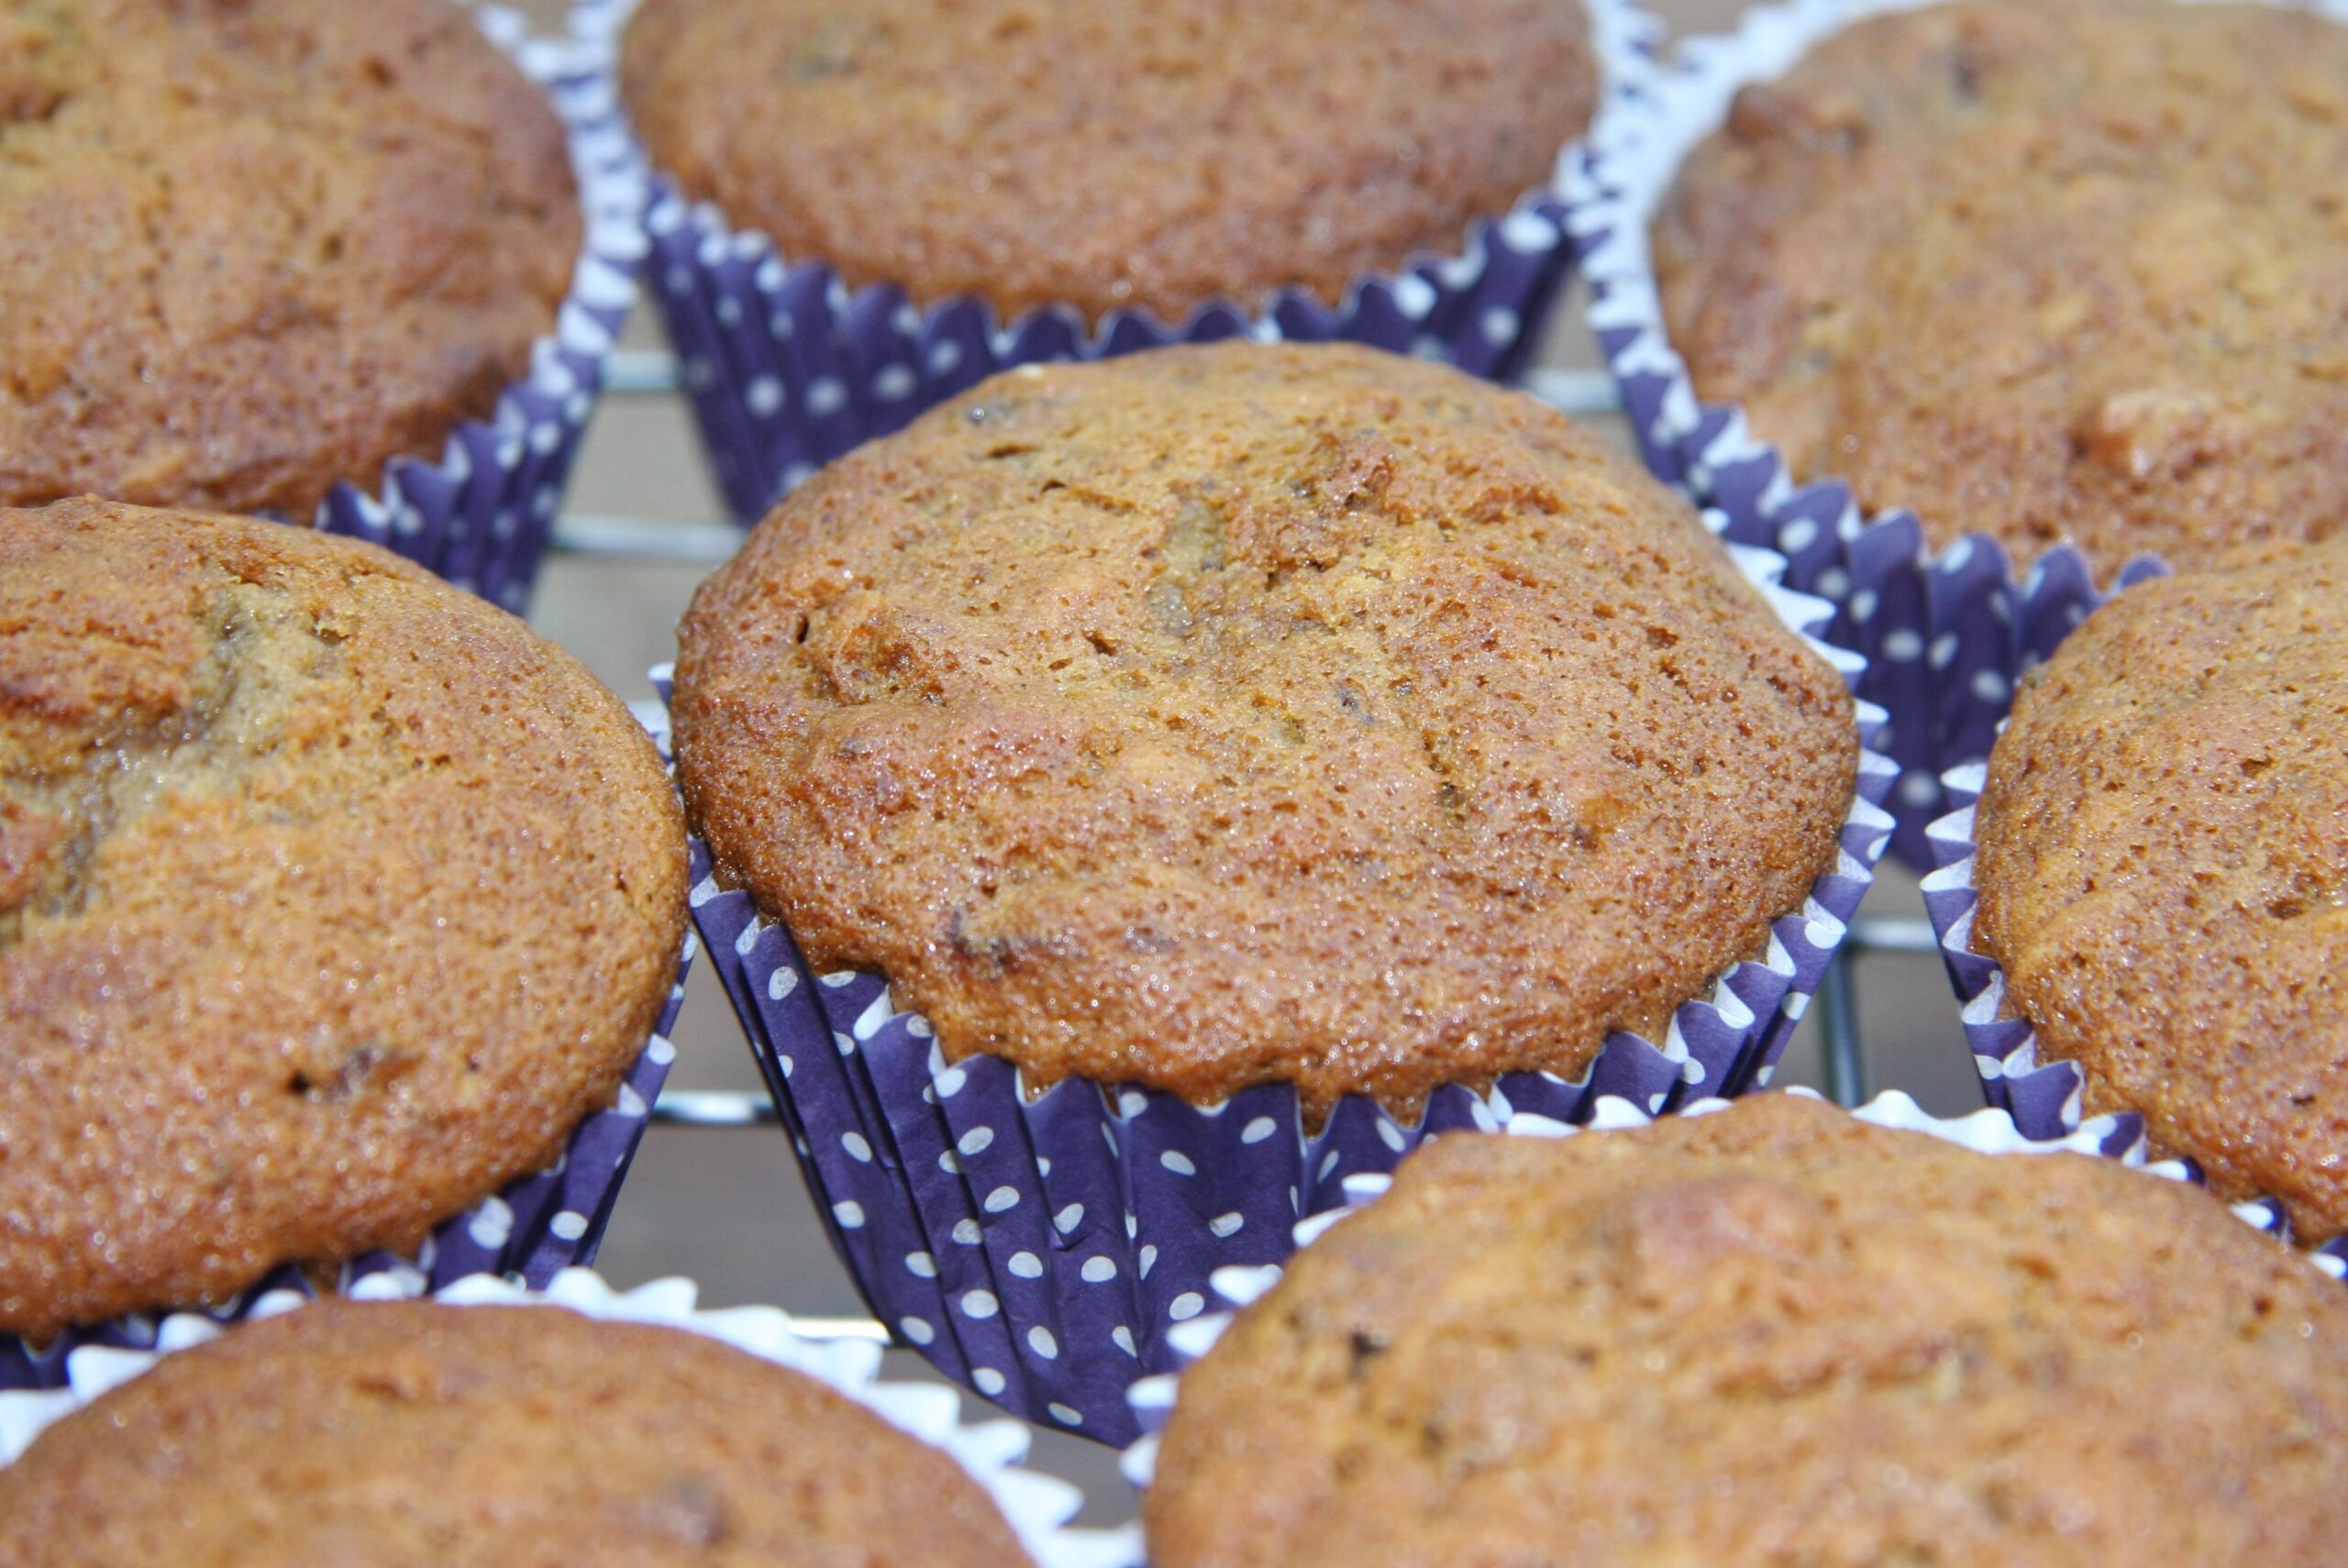  A great way to start the day, these muffins are packed with energy and flavor.